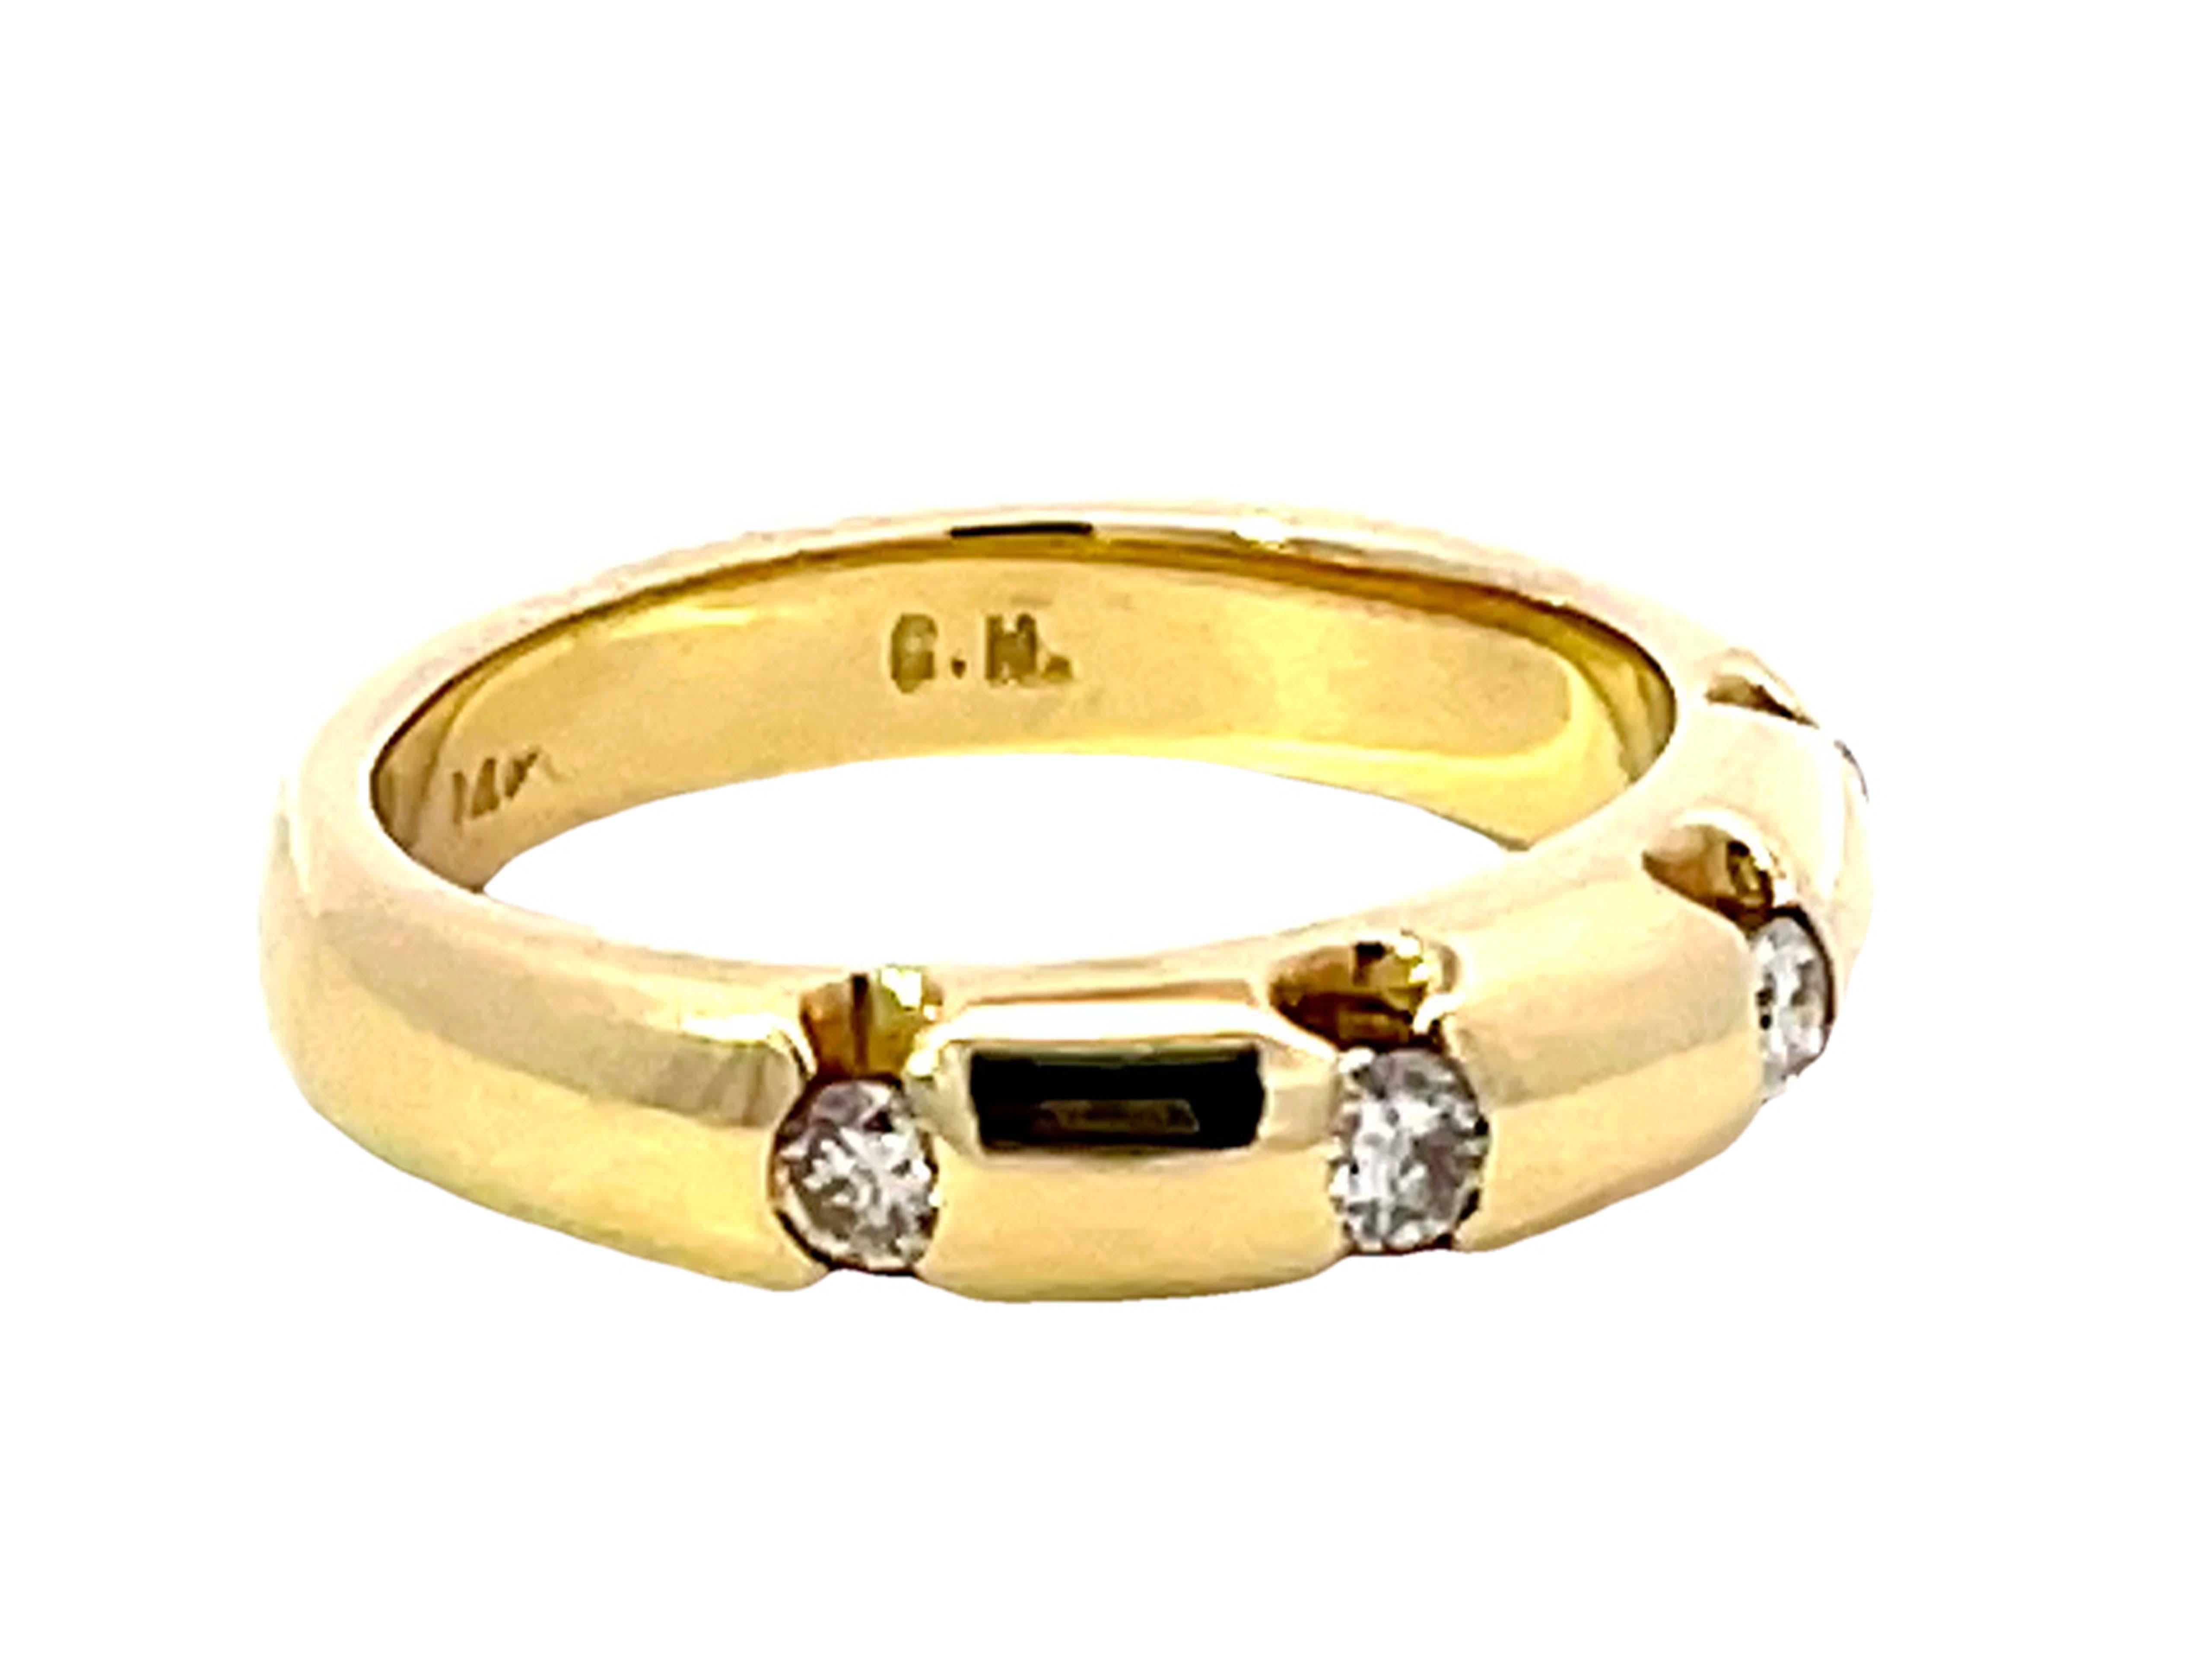 Modern 4 Brilliant Cut Diamond Band Ring Solid 14k Yellow Gold For Sale